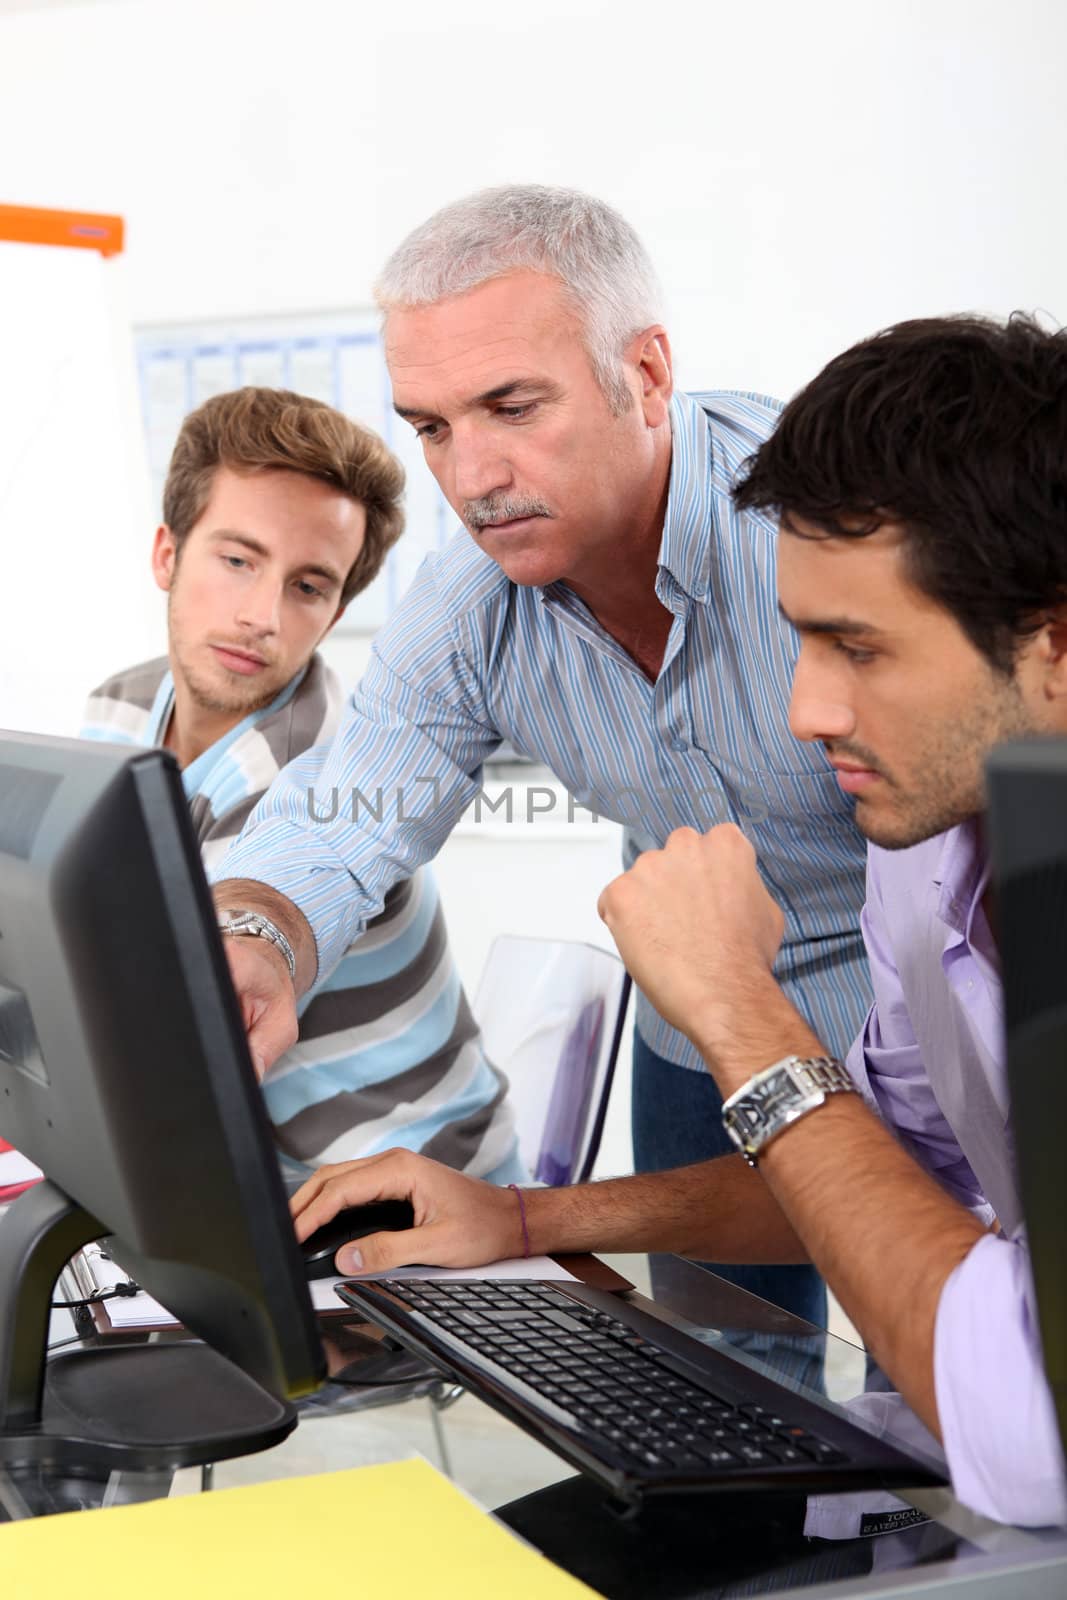 College lecturer showing students something on the computer